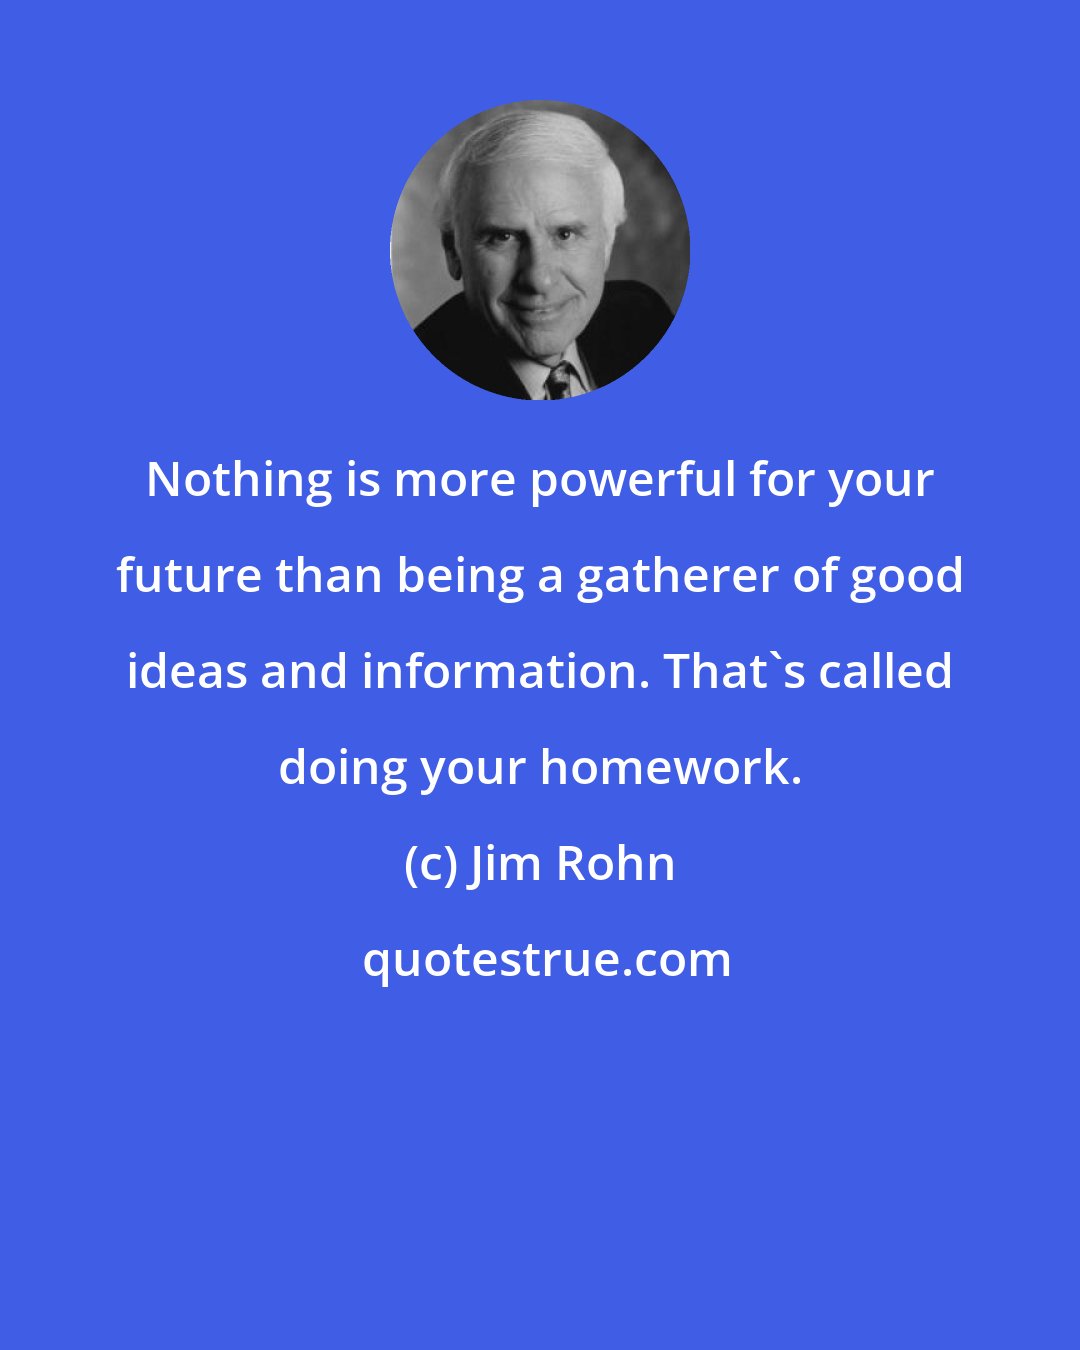 Jim Rohn: Nothing is more powerful for your future than being a gatherer of good ideas and information. That's called doing your homework.